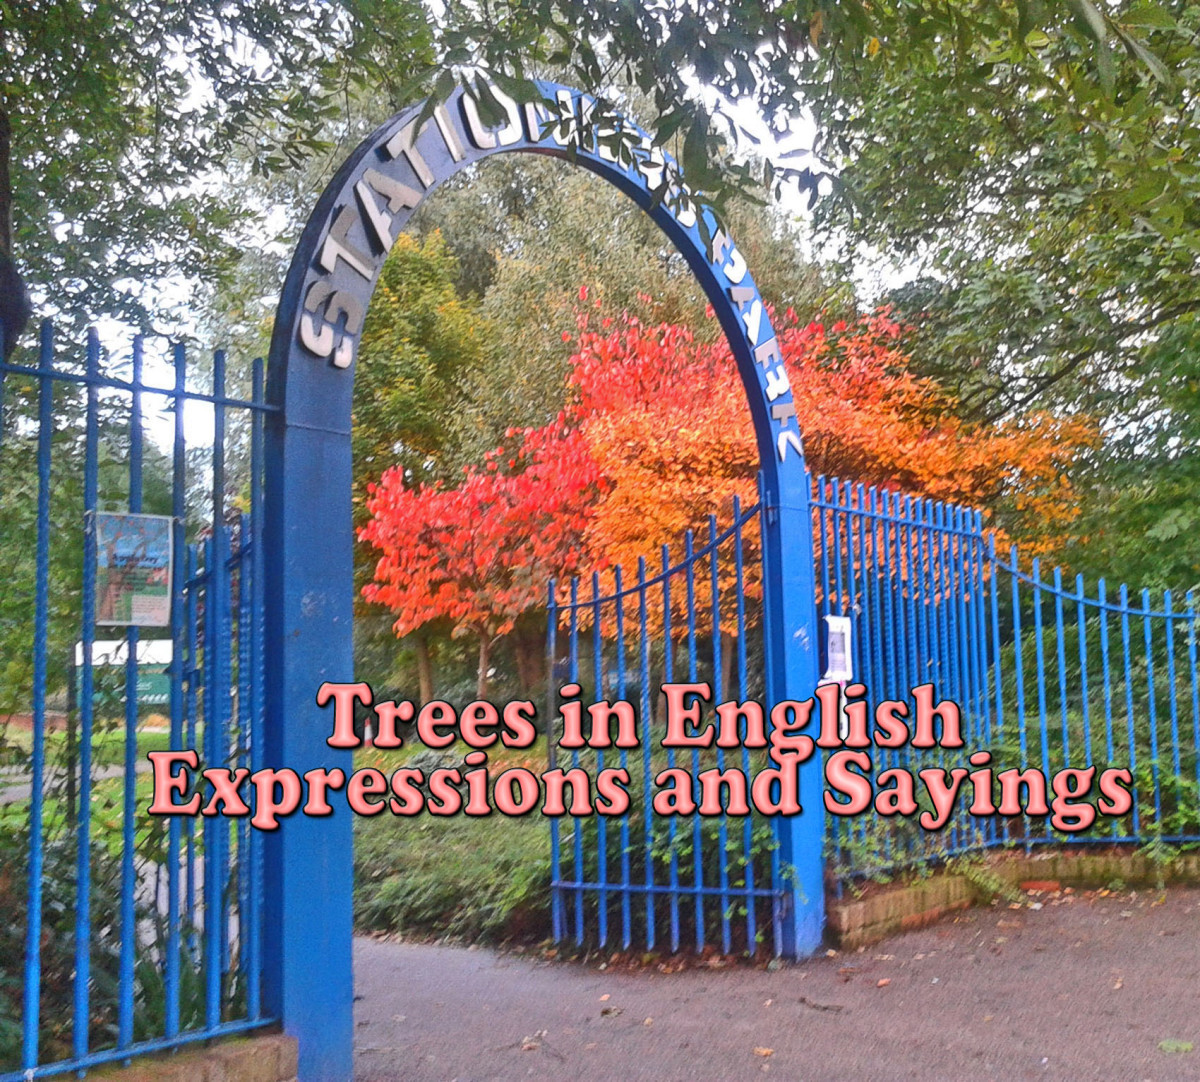 Trees in English Expressions and Sayings